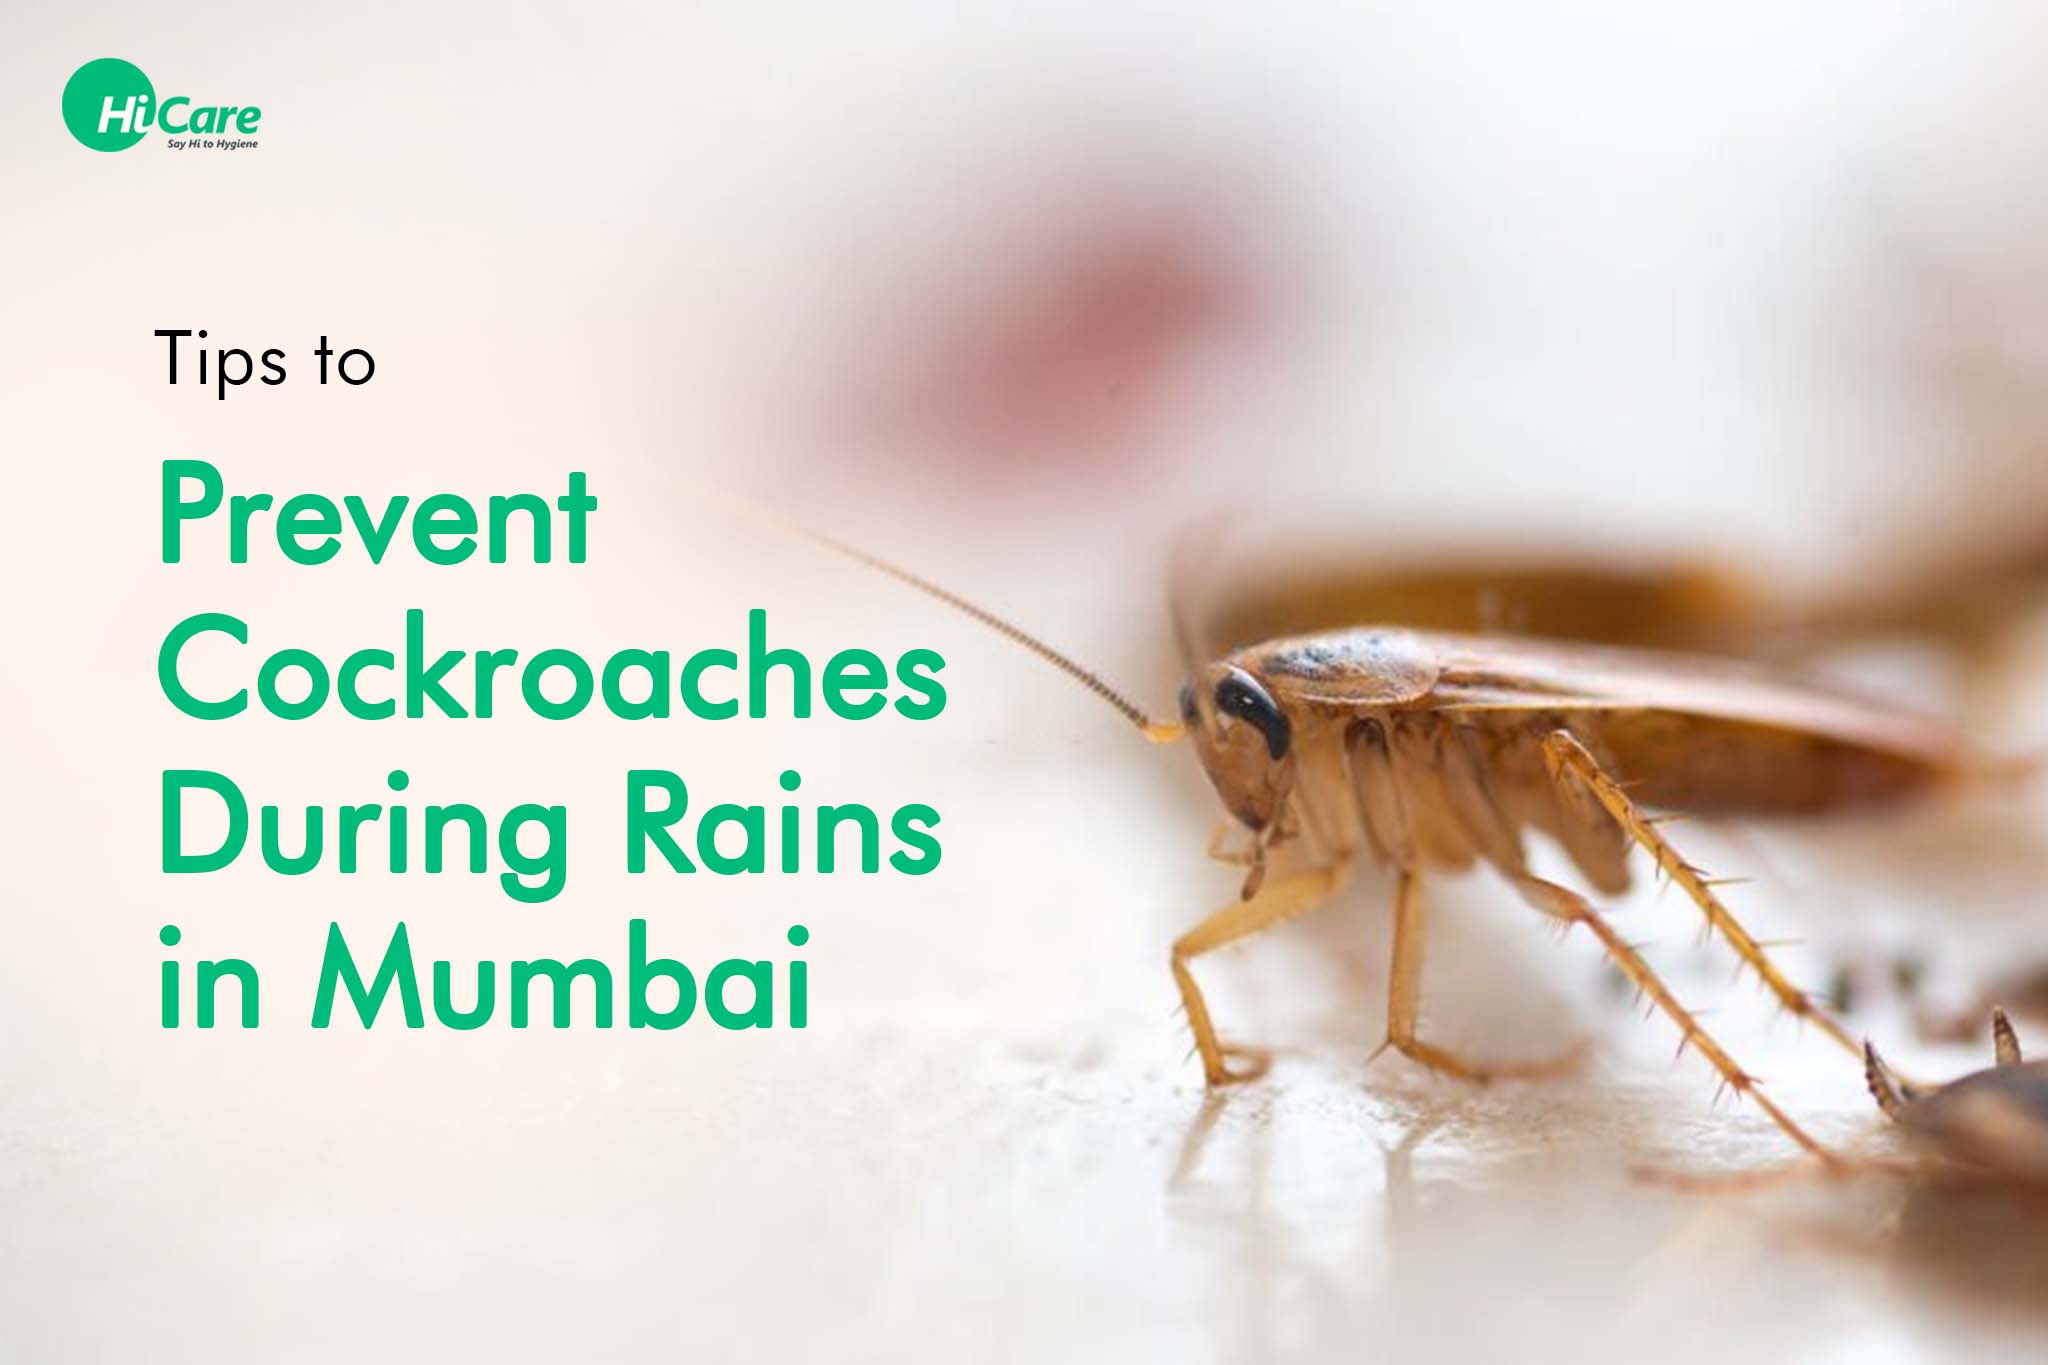 7 Tips to Prevent Cockroaches During Rains in Mumbai